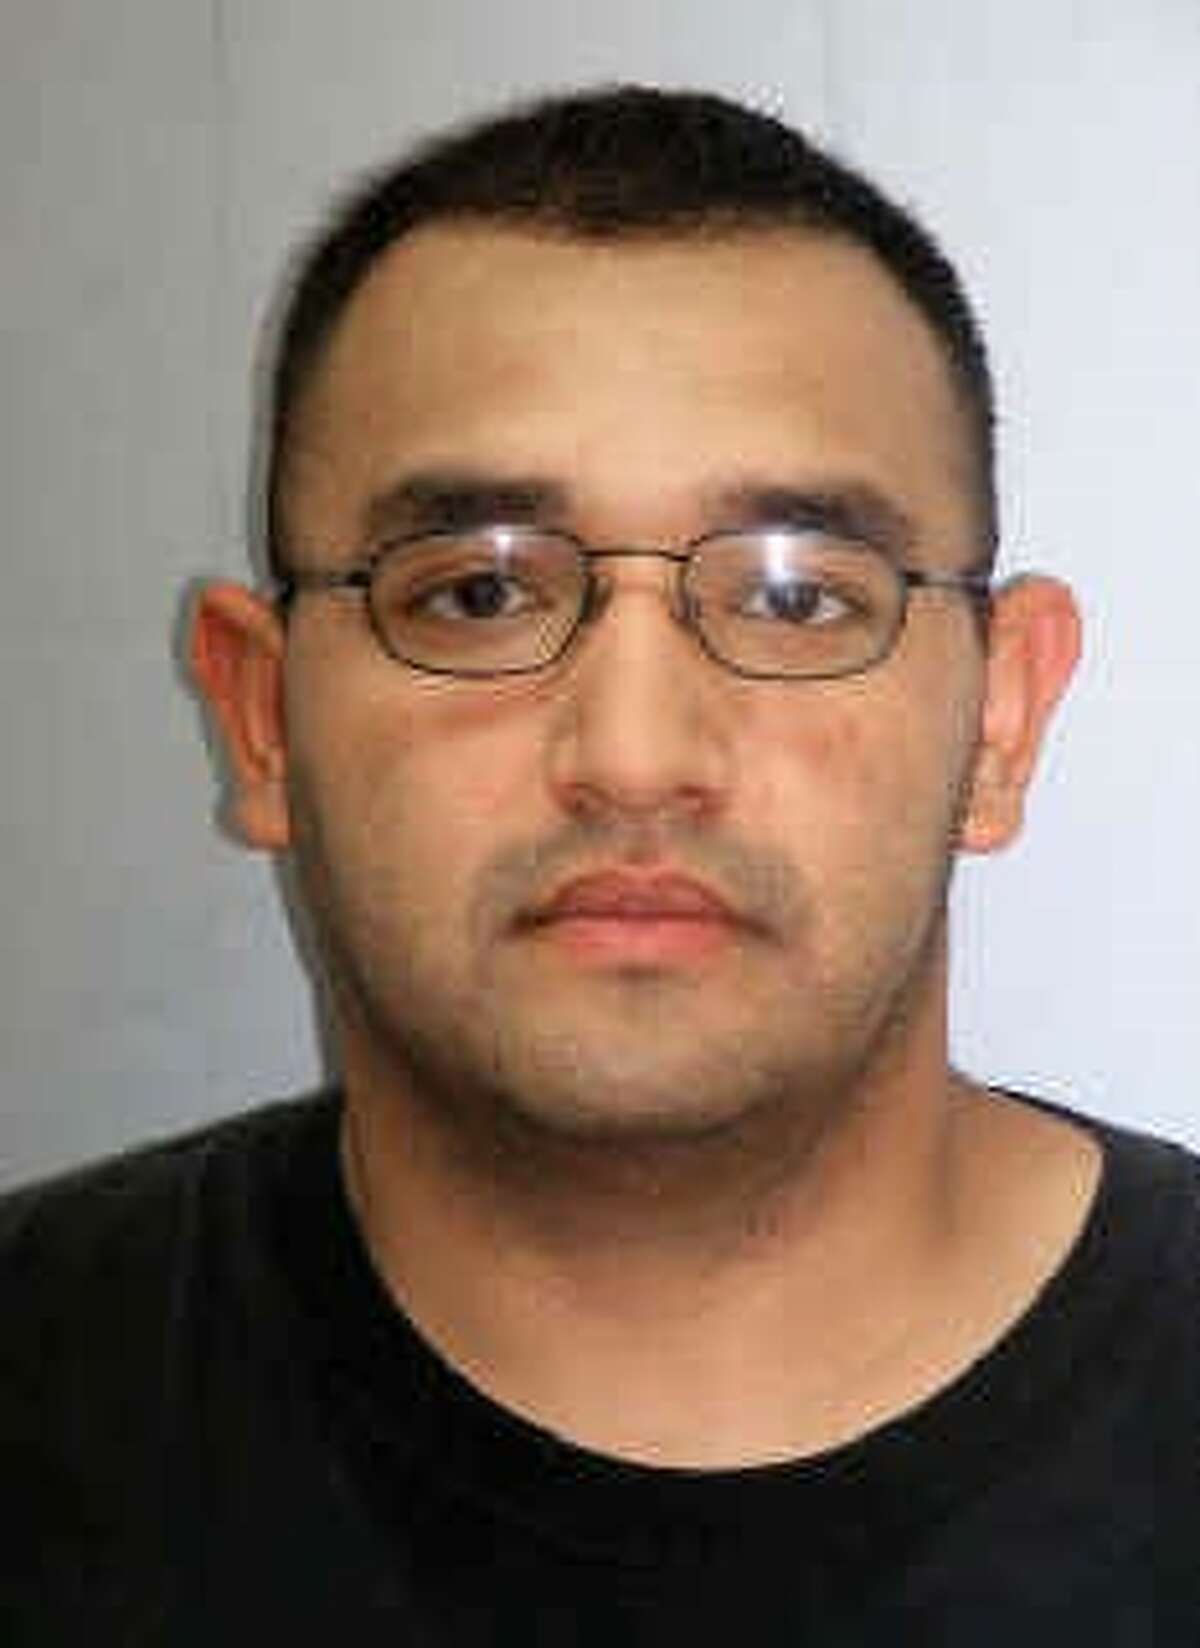 Erick Montez, 35, a Bexar County Sheriff's deputy with the detention division since 2008, was arrested on charges of sexual assault and violation of civil rights of a person in custody on Jan. 12, 2016.